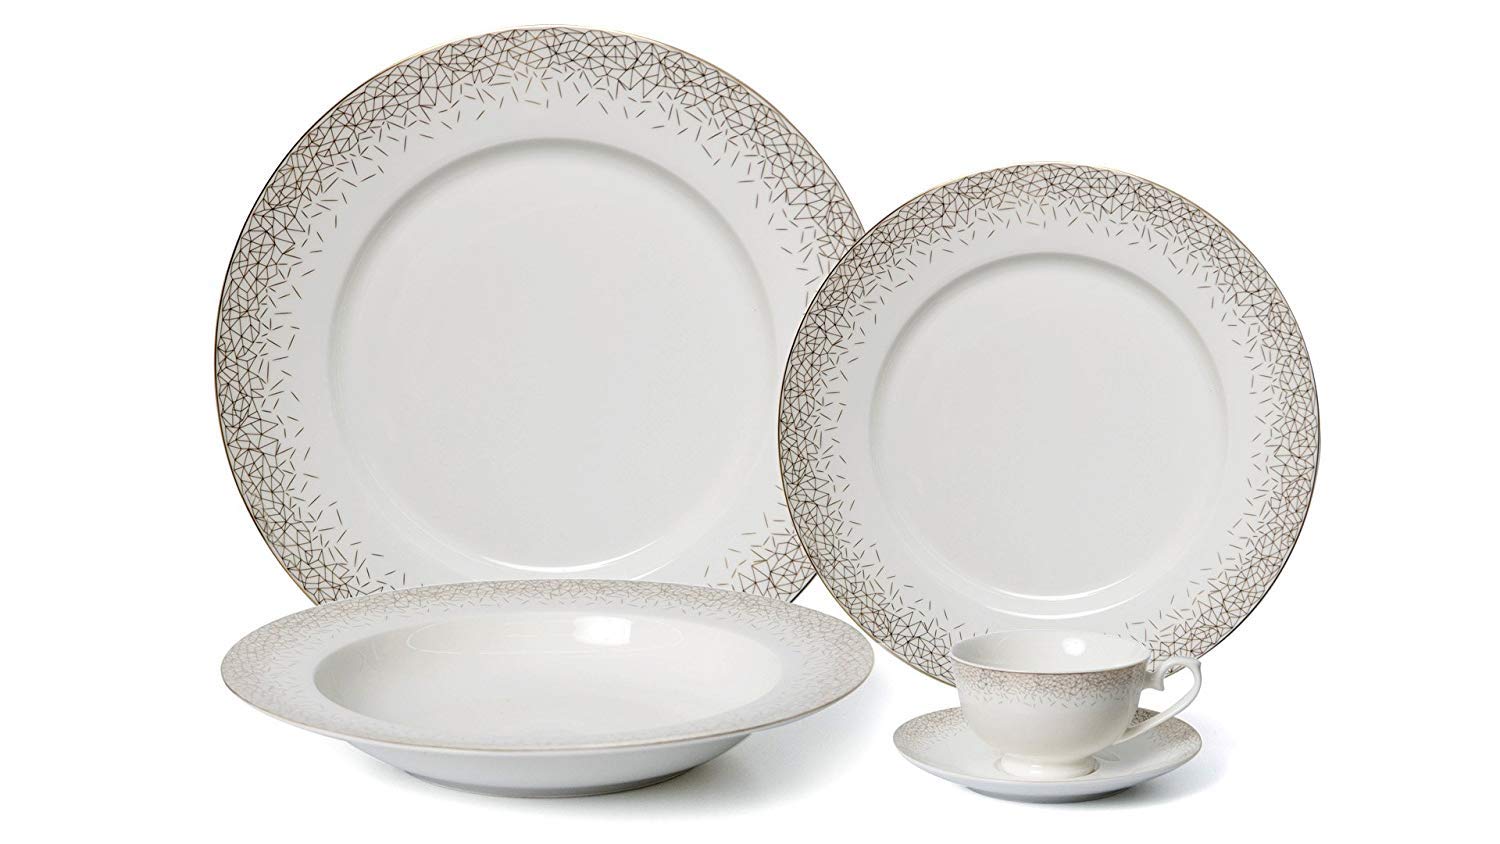 Euro Porcelain 5-Piece Dinner Set Service for 1, 24K Gold-plated Luxury Bone China Tableware - image 1 of 3